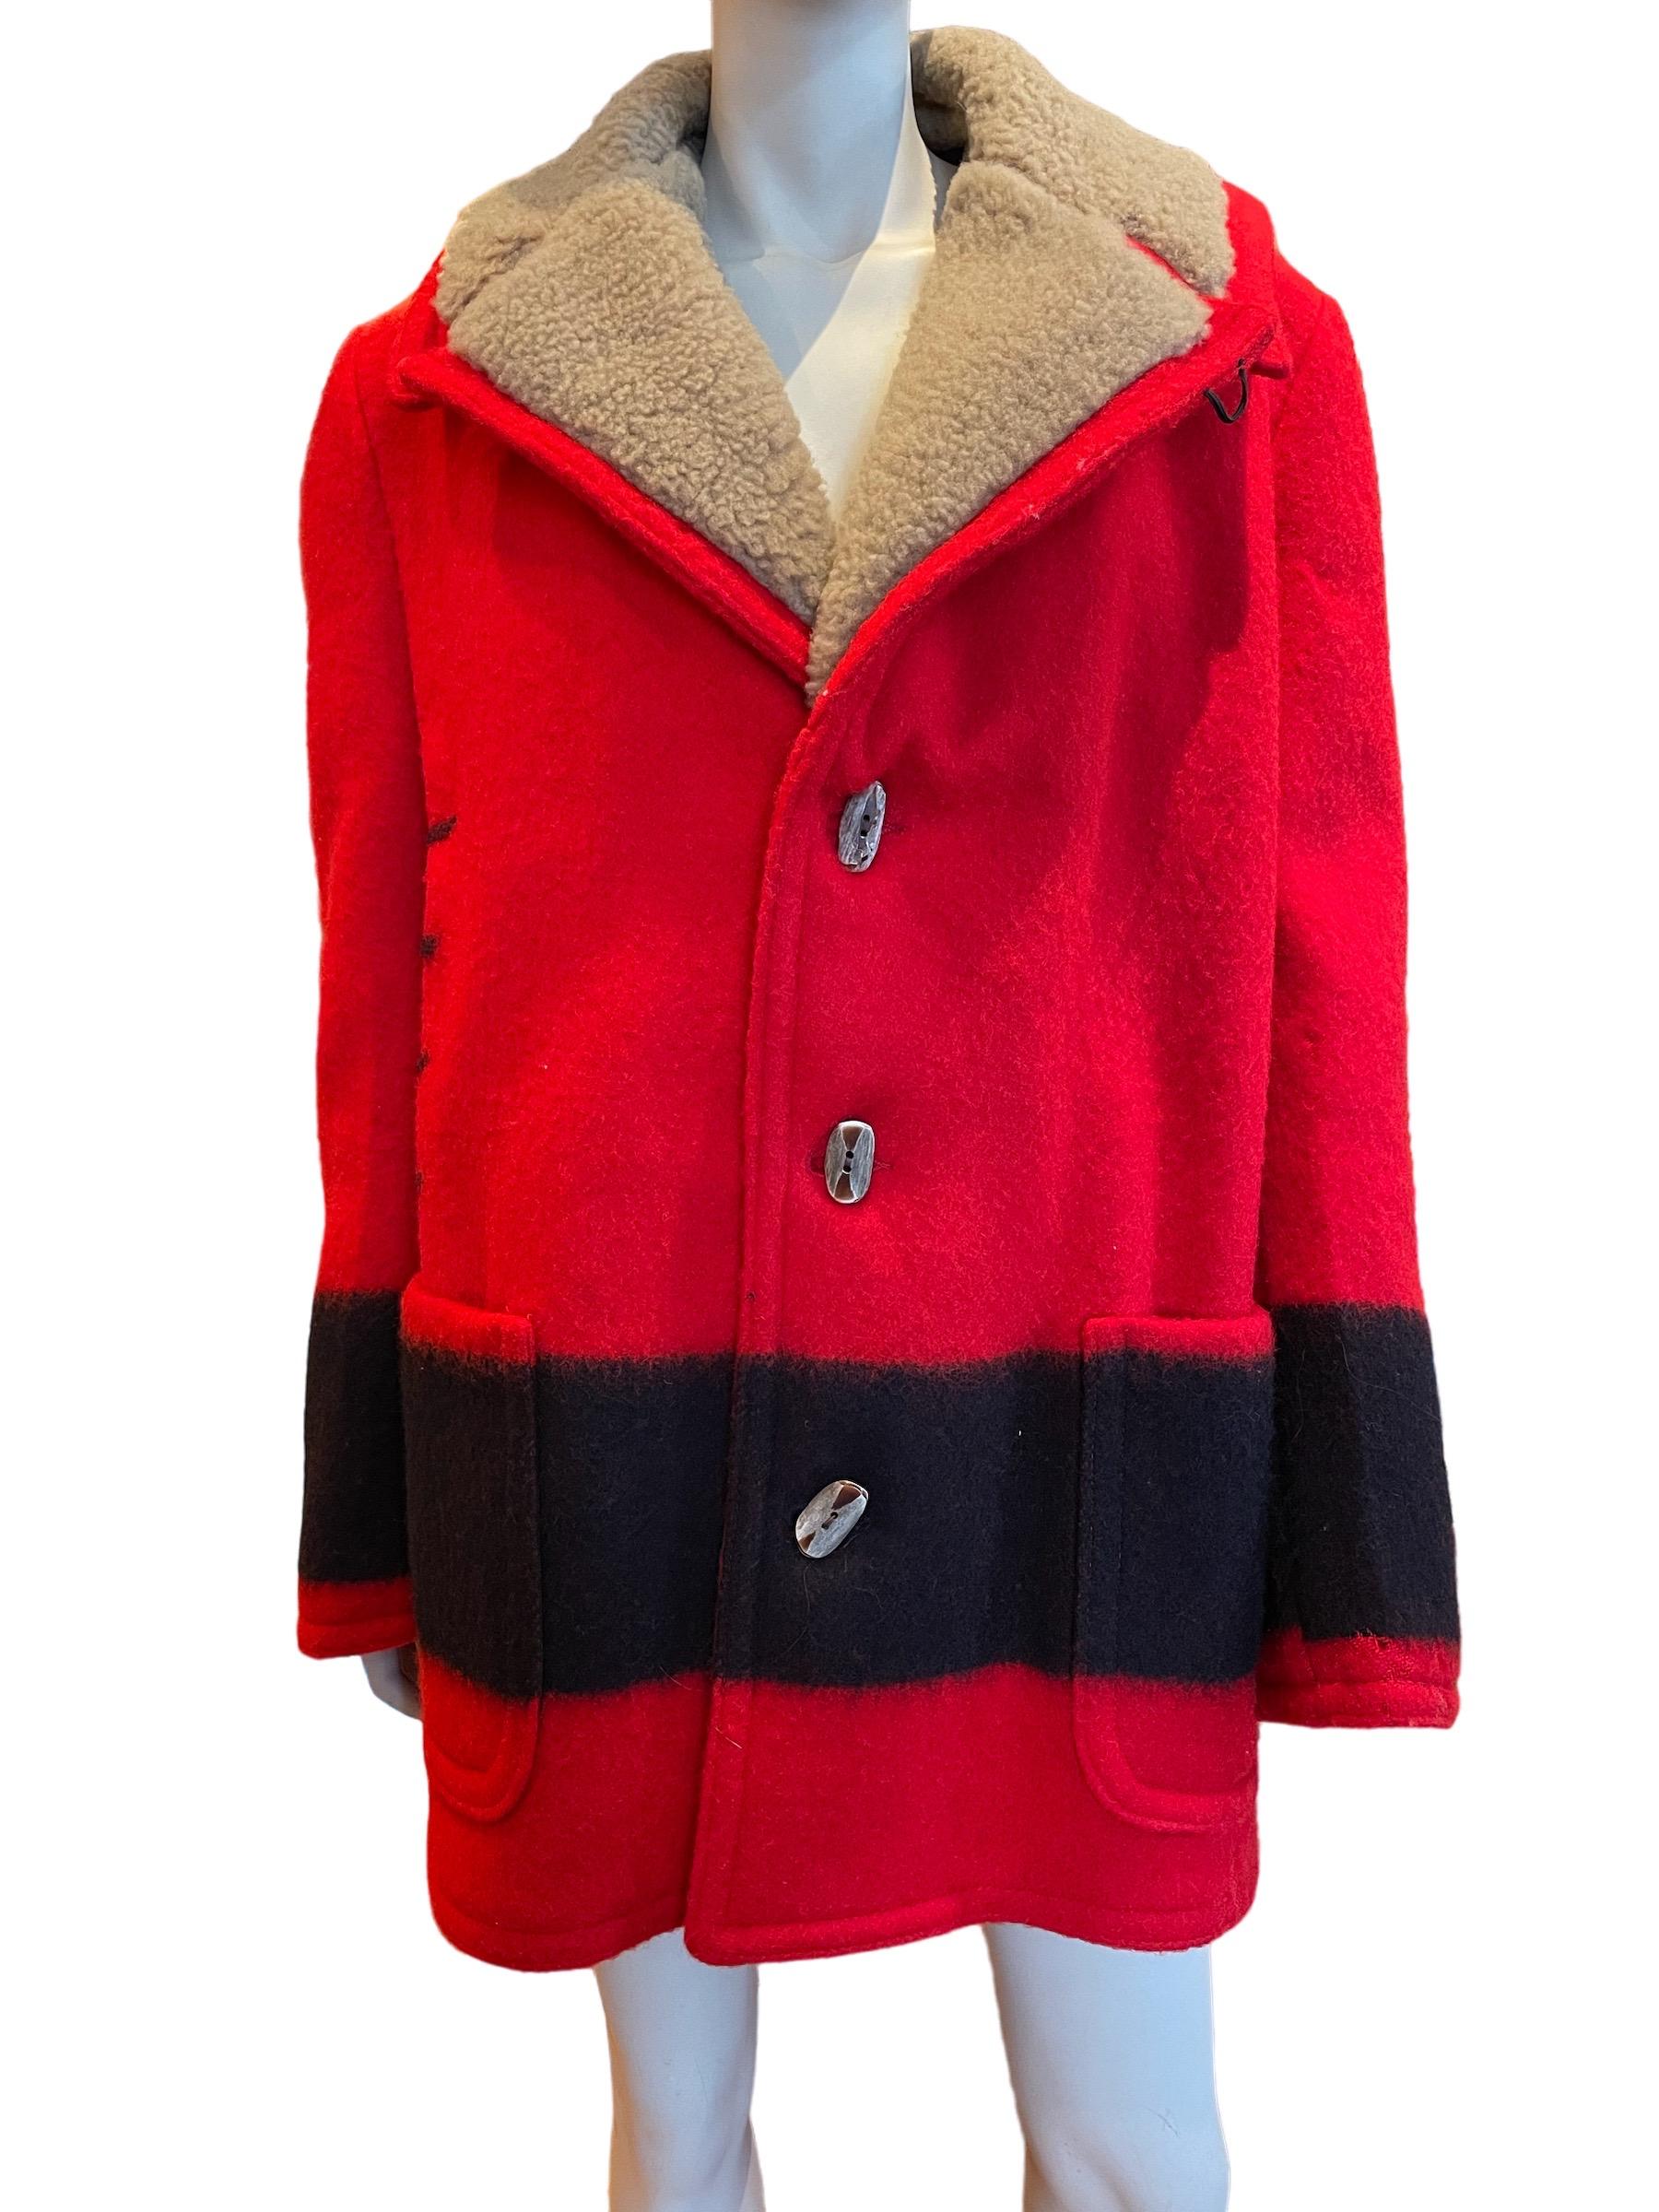 1980s Red Wool Marlboro Jacket 

100% wool red jacket in amazing condition by Marlboro 

Length: 32”
Shoulders: 19” across 
Chest: 44” 